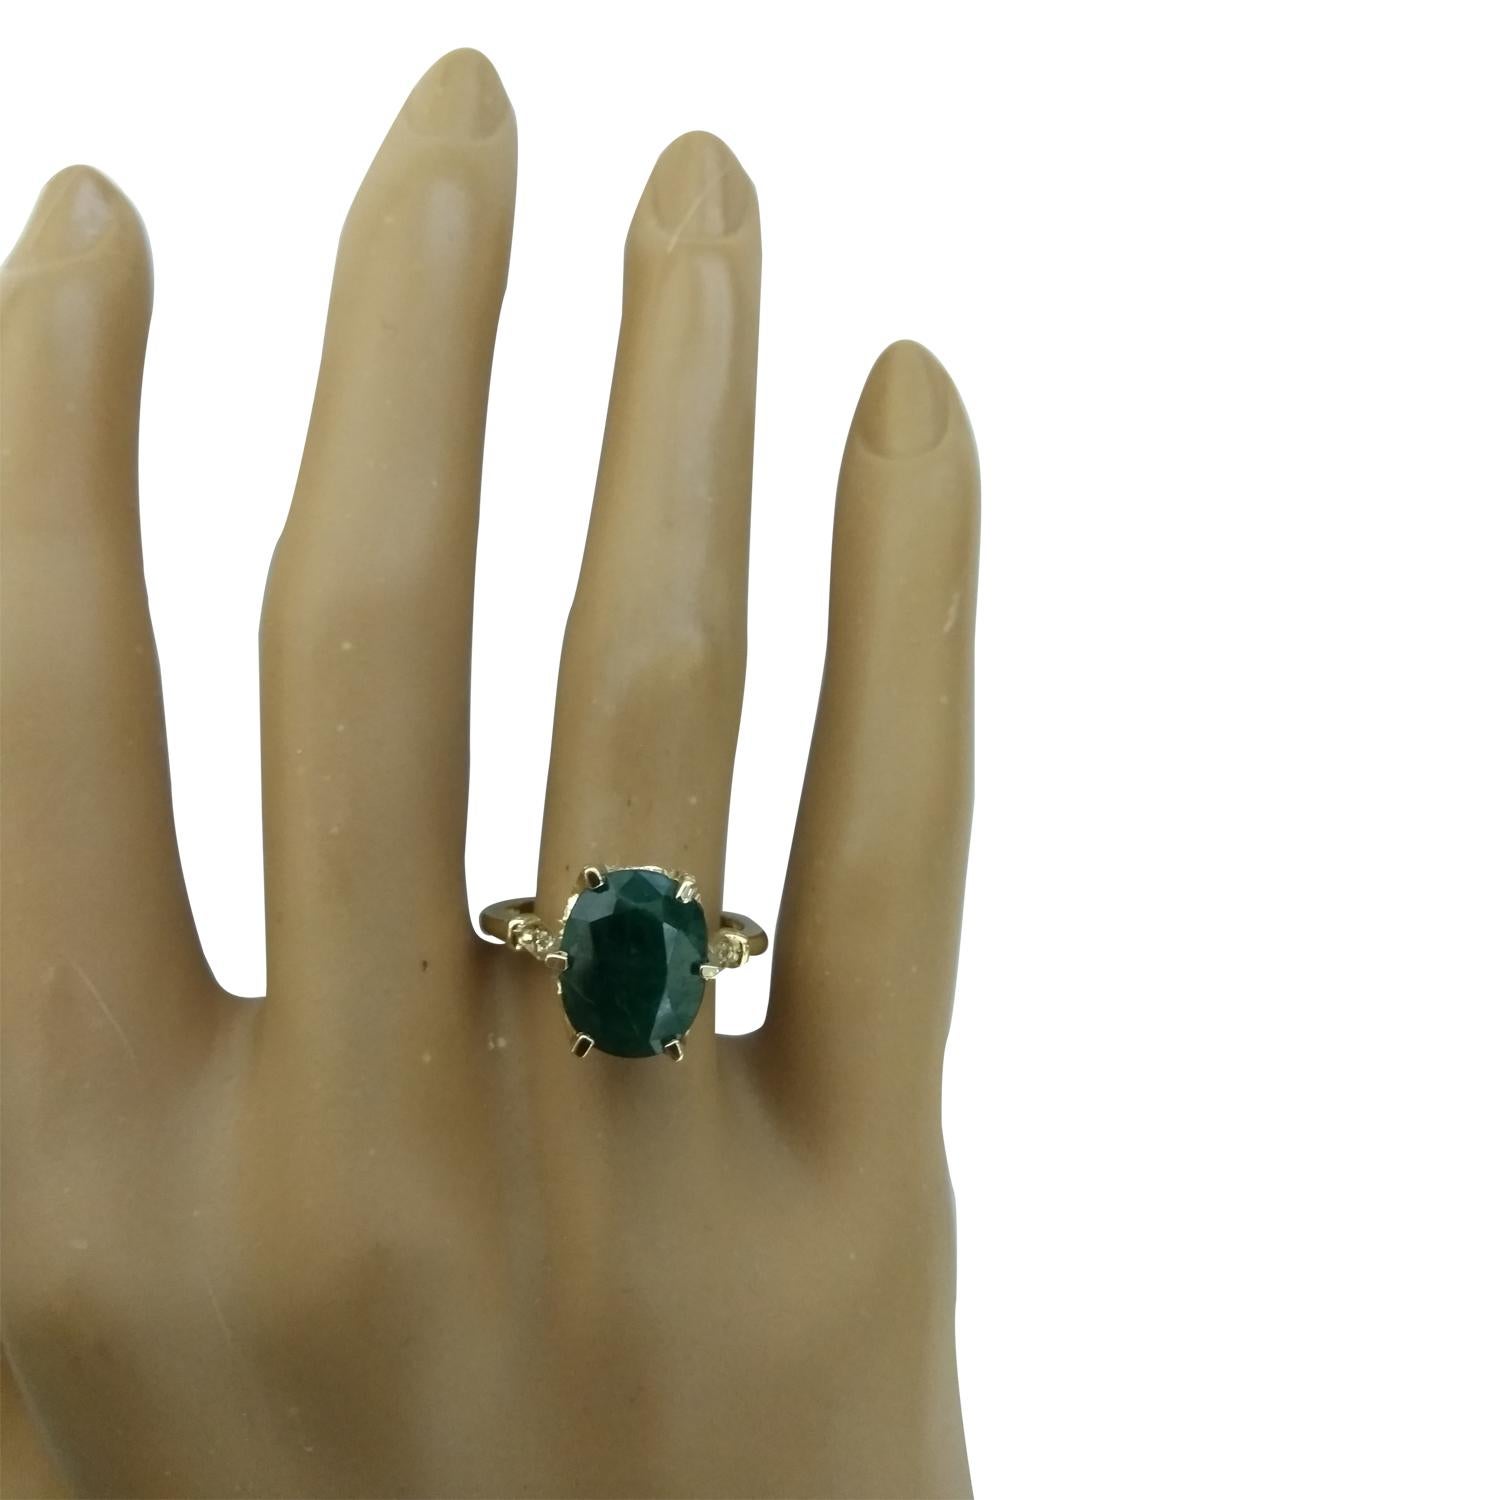 3.64 Carat Natural Emerald 14 Karat Solid Yellow Gold Diamond Ring
Stamped: 14K 
Total Ring Weight: 4.3 Grams 
Emerald Weight 3.58 Carat (11.00x9.00 Millimeters)
Diamond Weight: 0.06 carat (F-G Color, VS2-SI1 Clarity )
Face Measures: 11.00x9.00